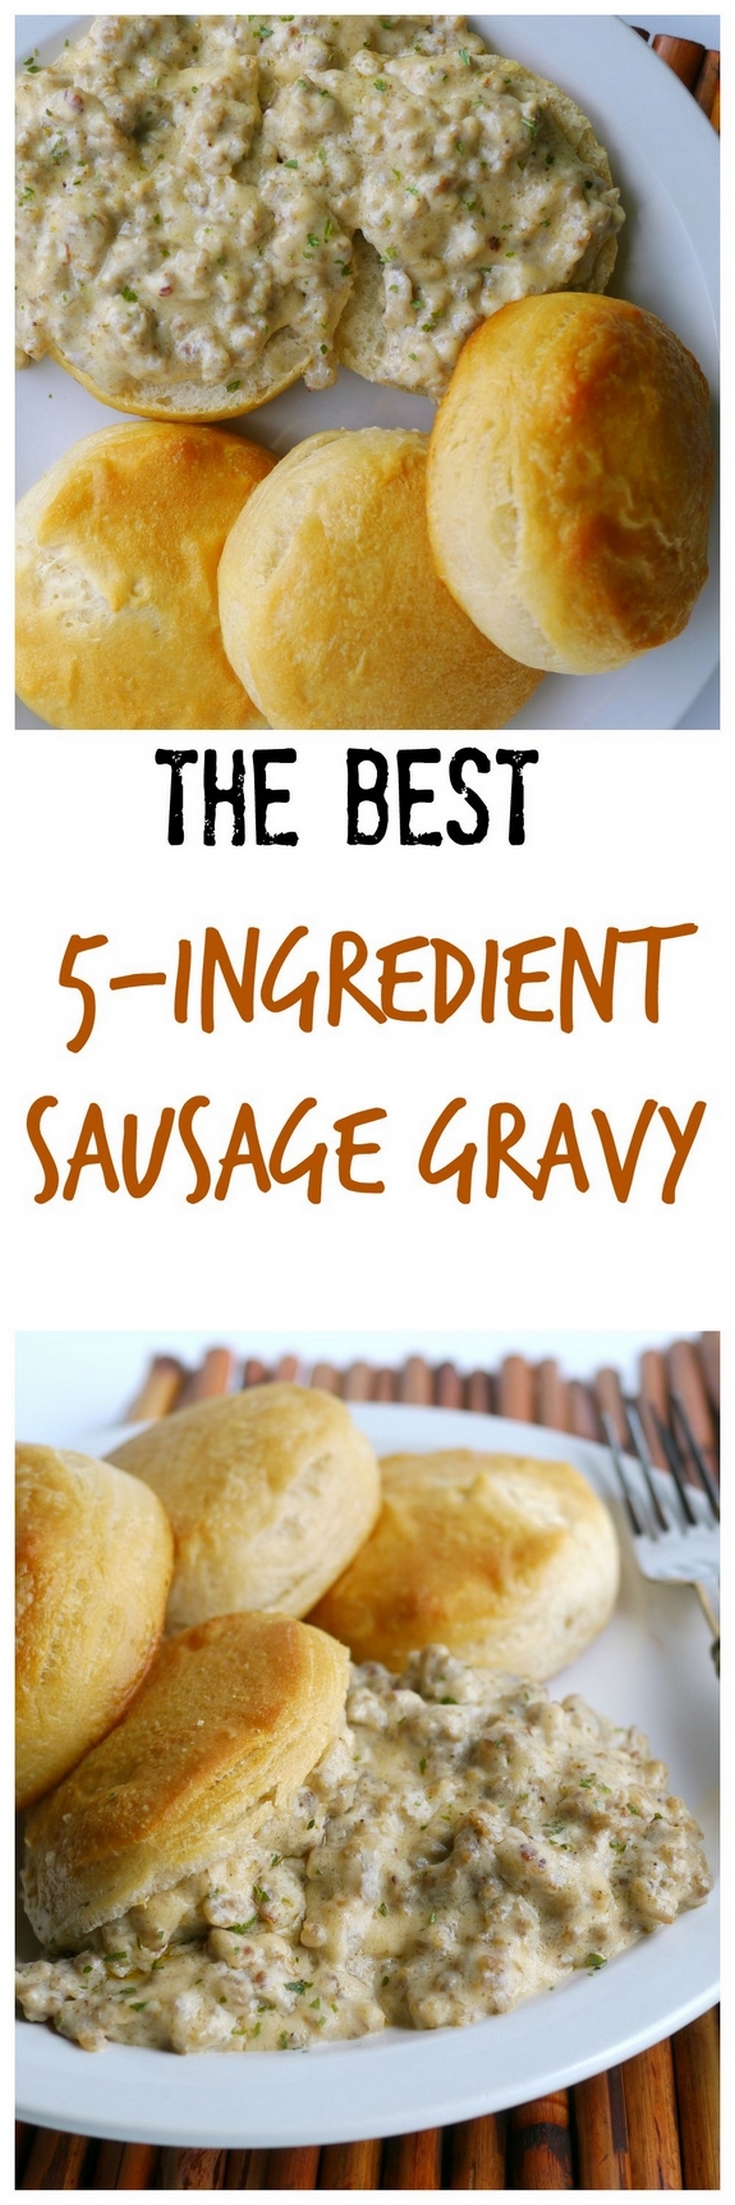 This 5-Ingredient Sausage Gravy for Biscuits has two REALLY specific ingredients that make it great. via @cmpollak1